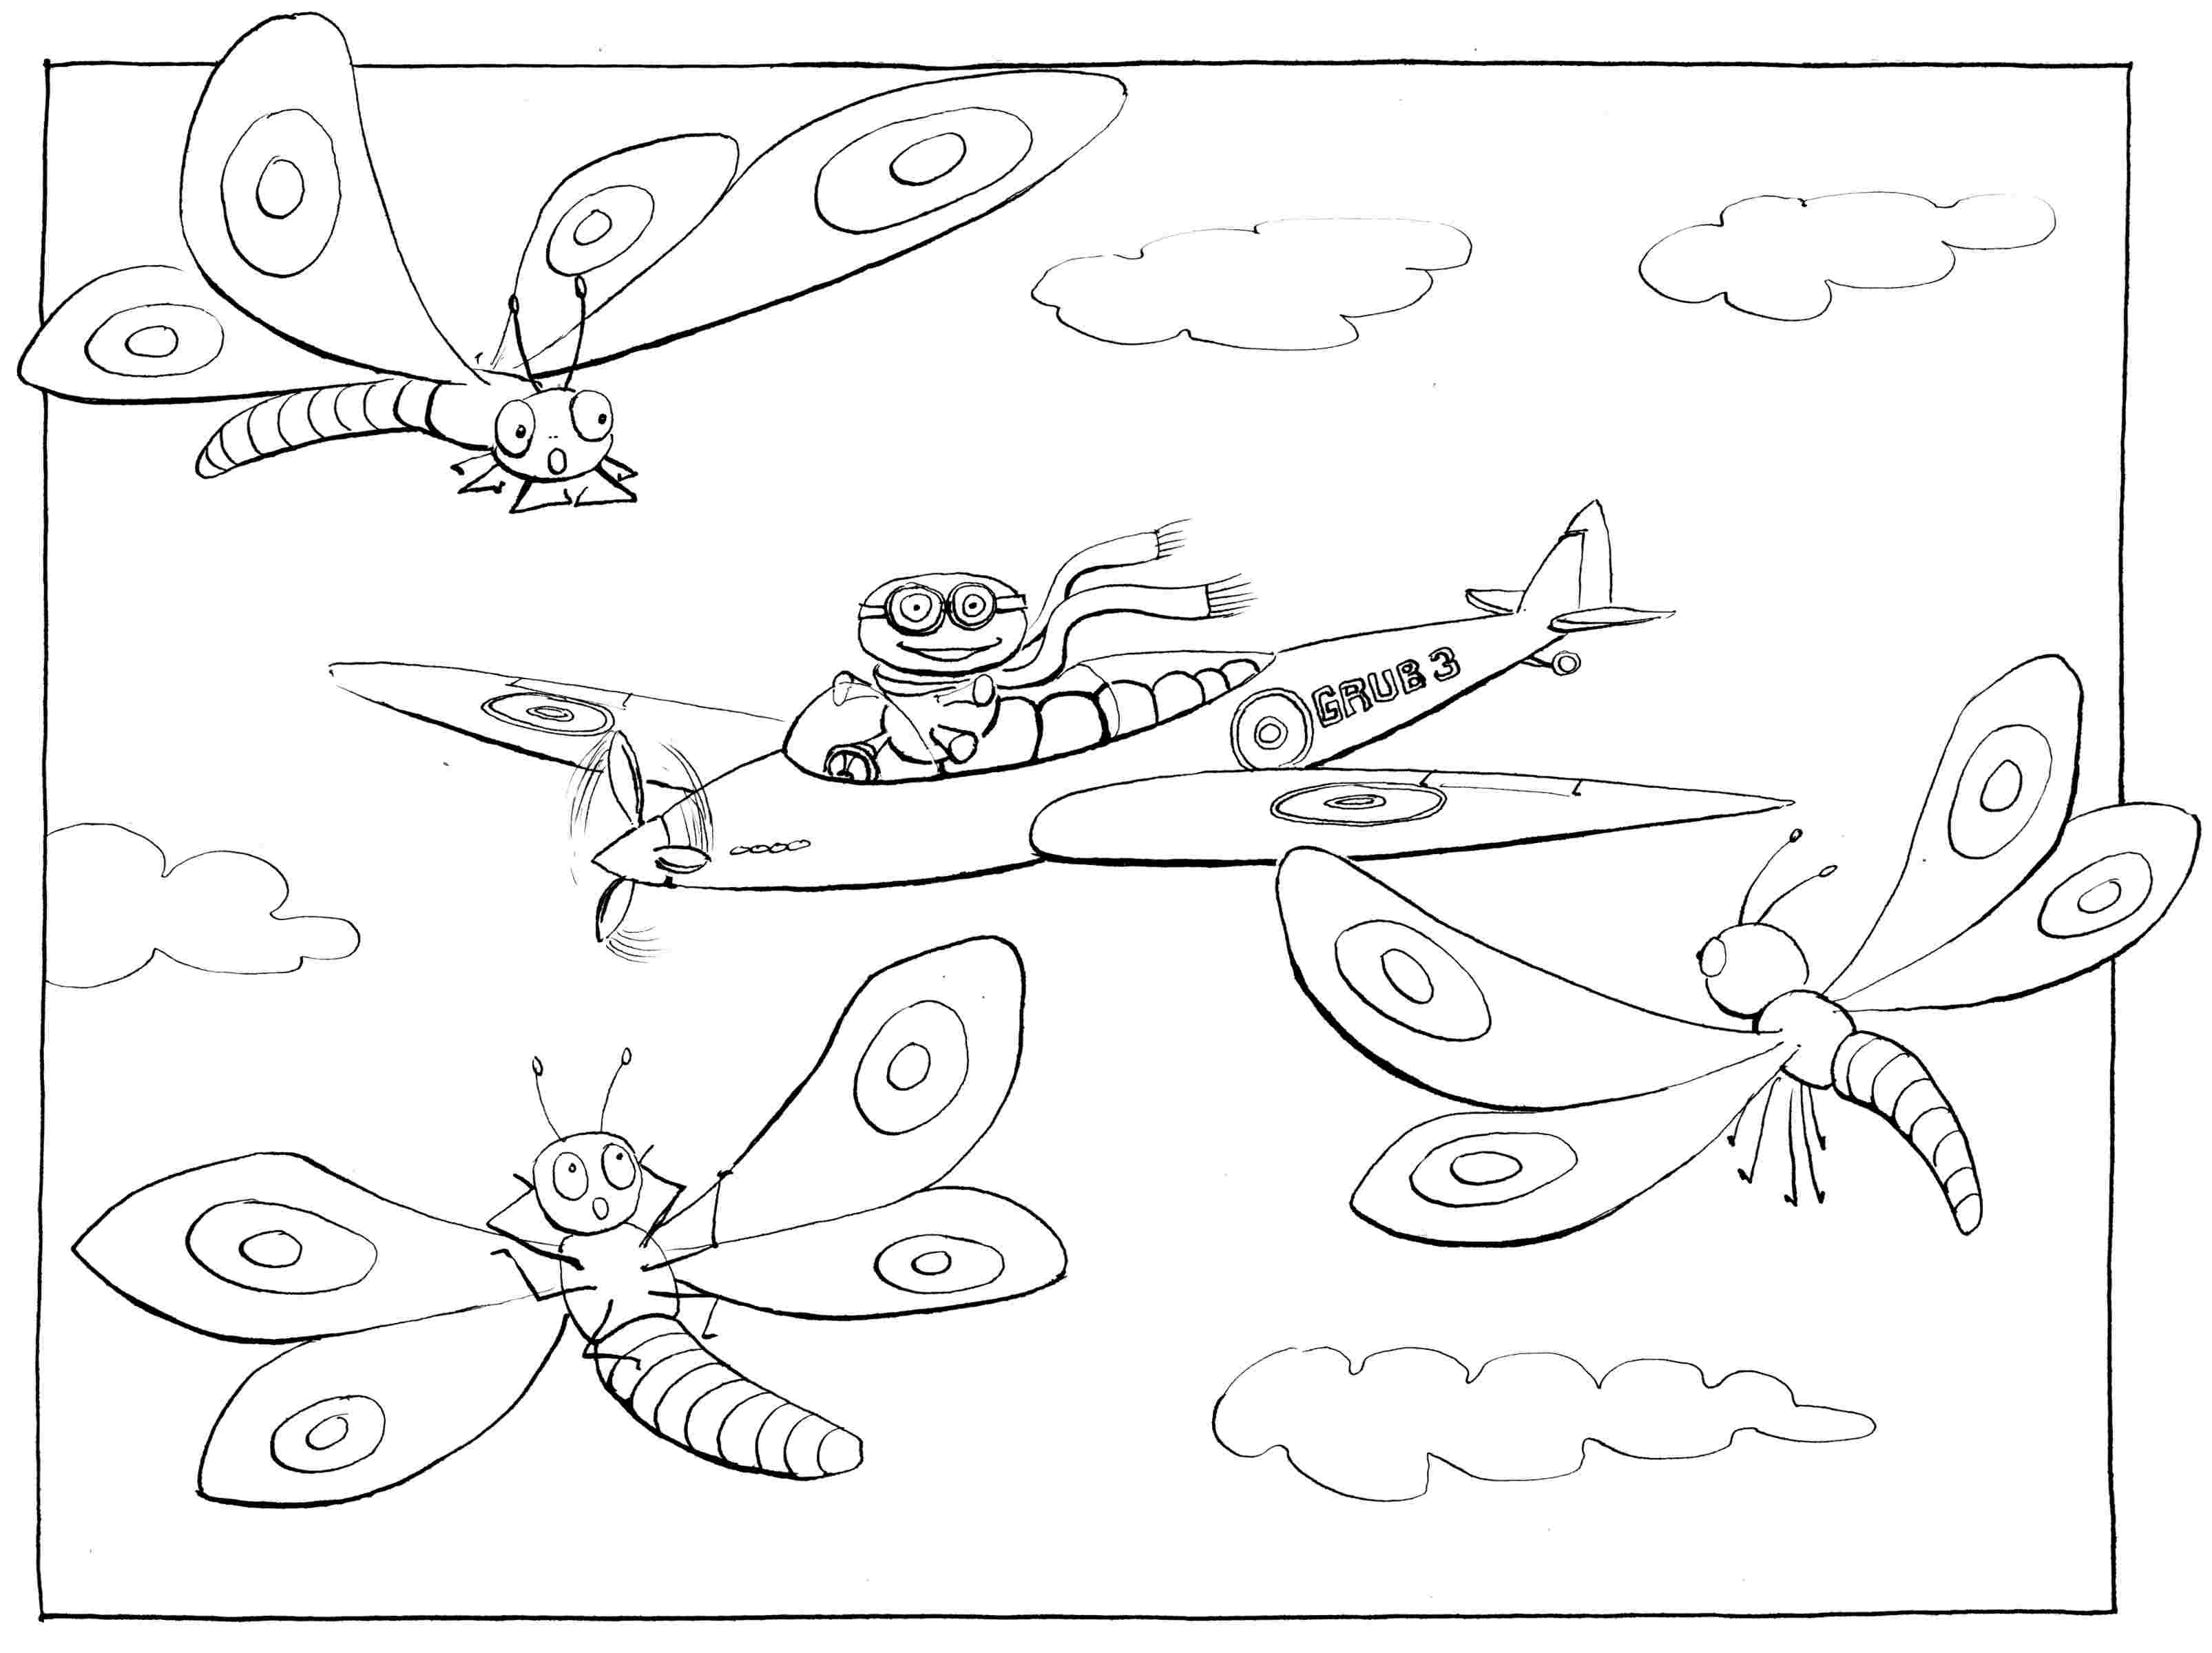 Learning to Fly: part III - colouring-in drawing - to download, right click and save, print out and colour in!